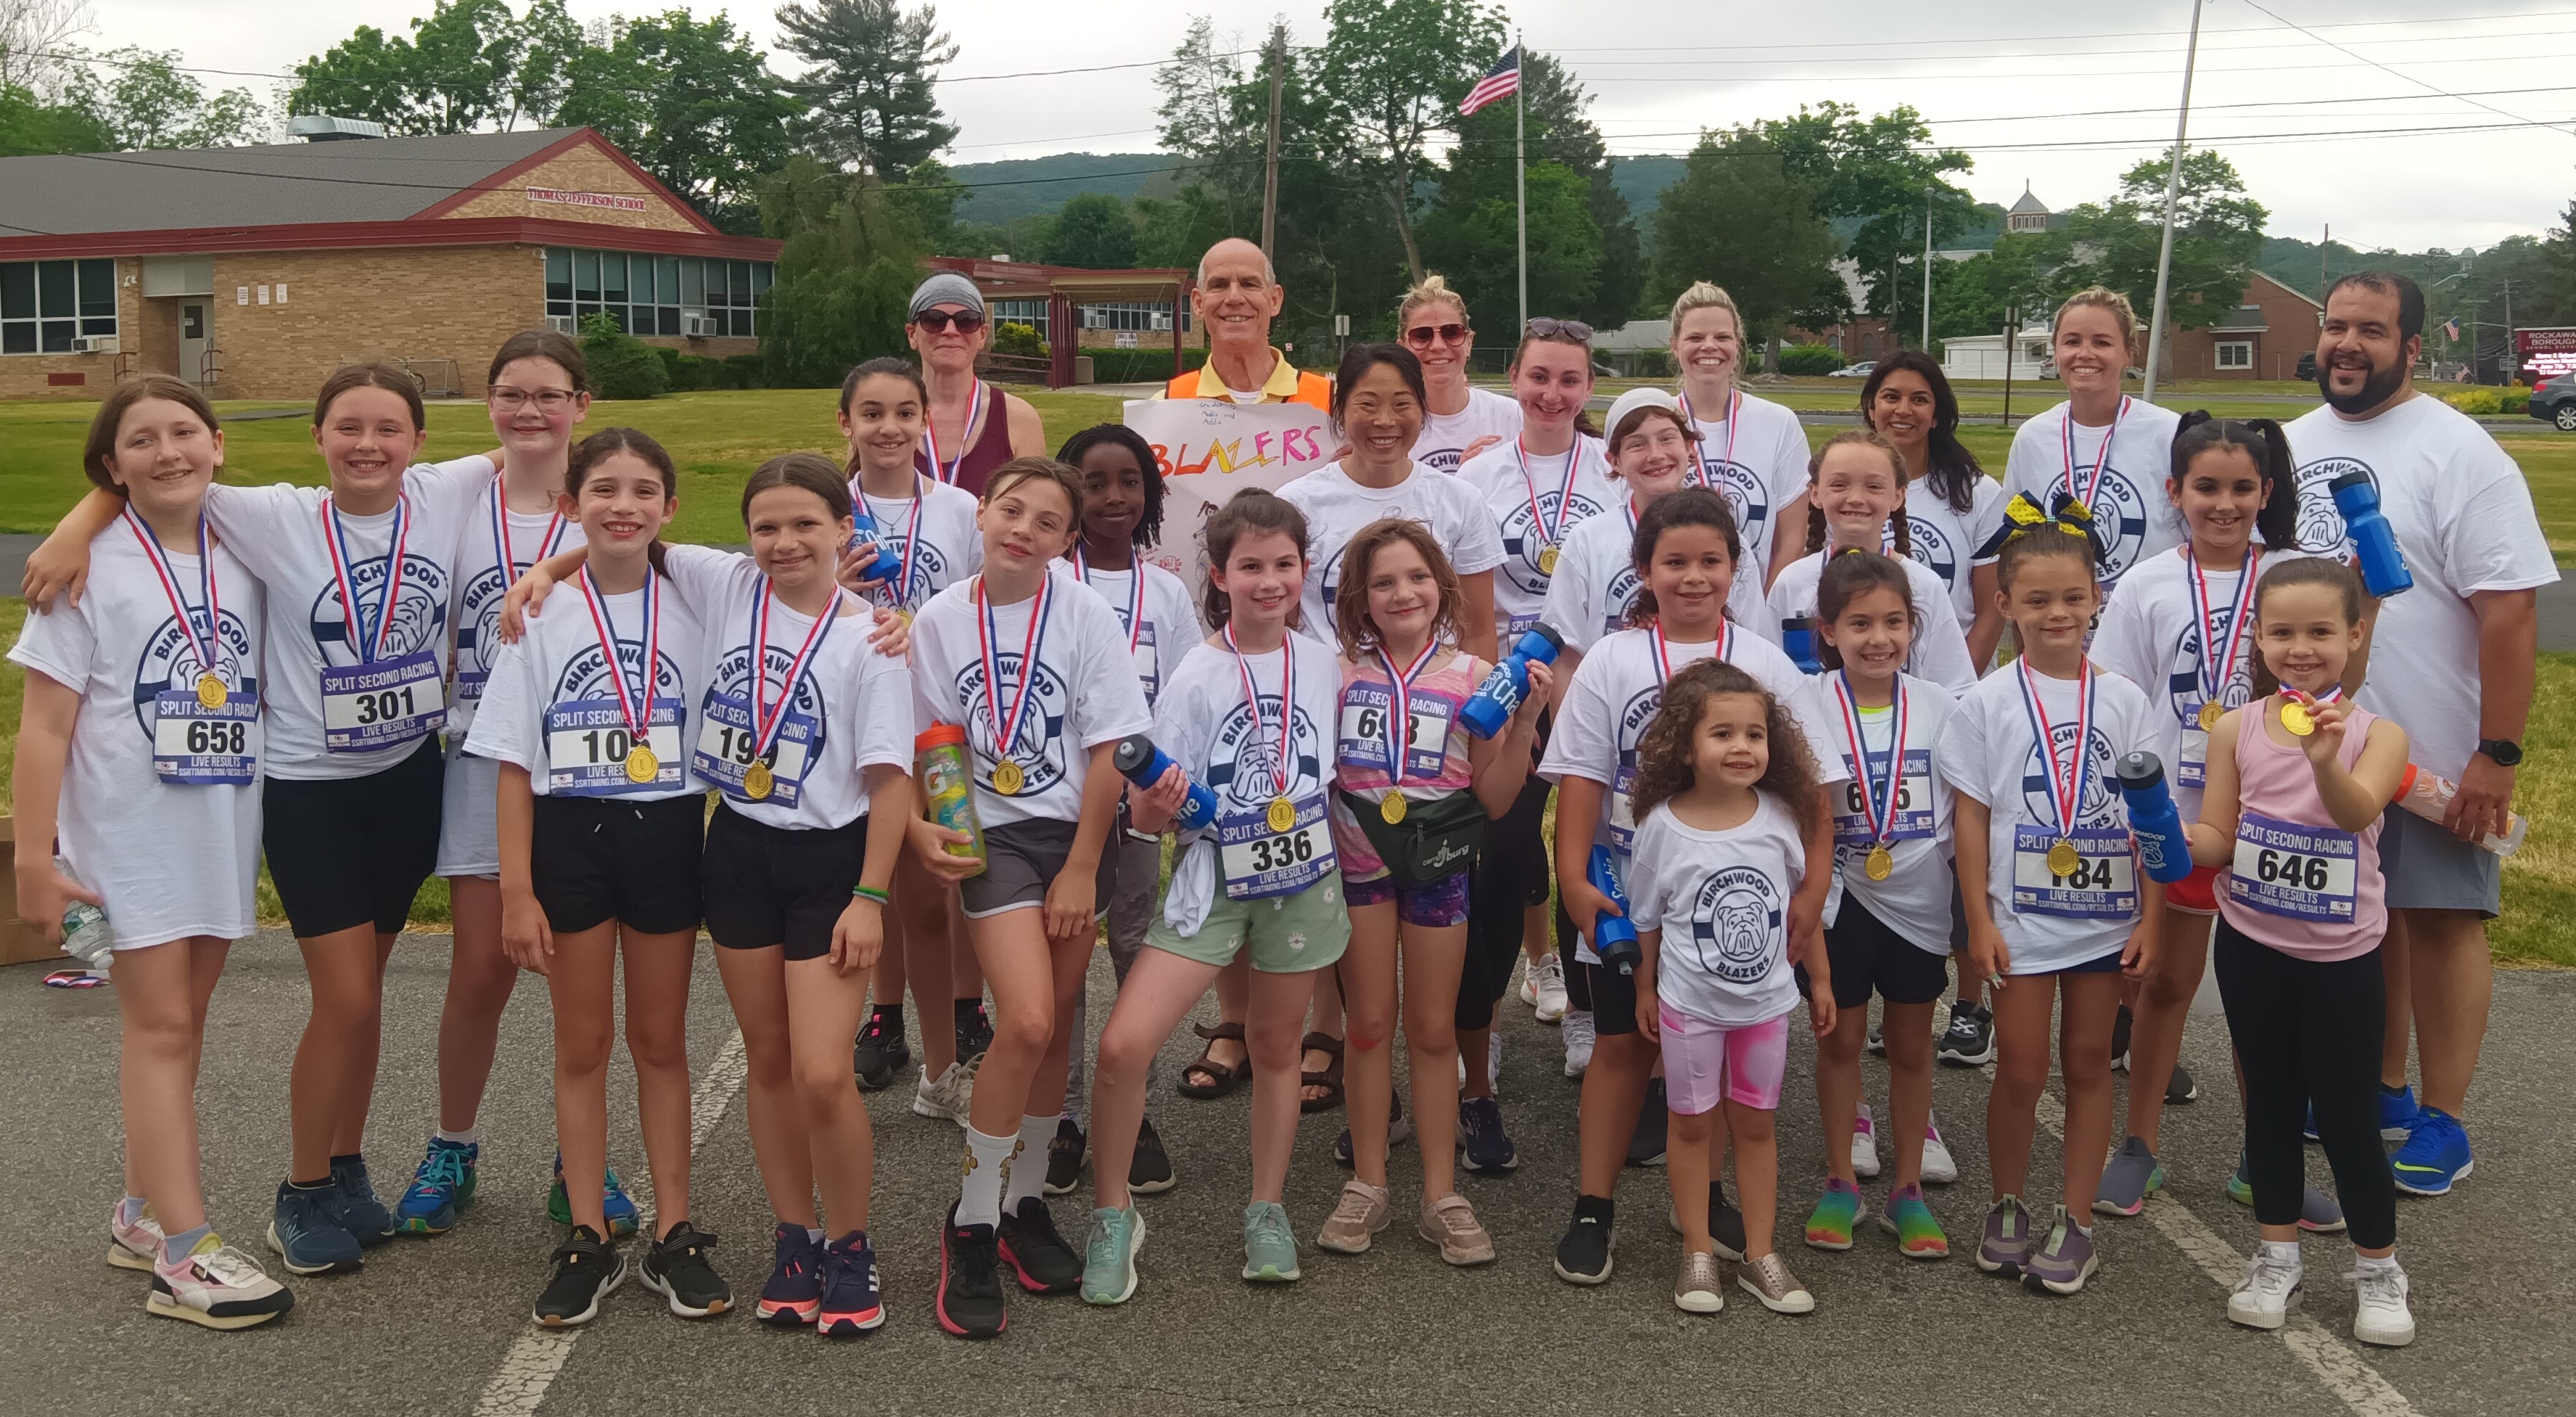 Dr. Corbett with students and community members at the Rotary 5K at Birchwood